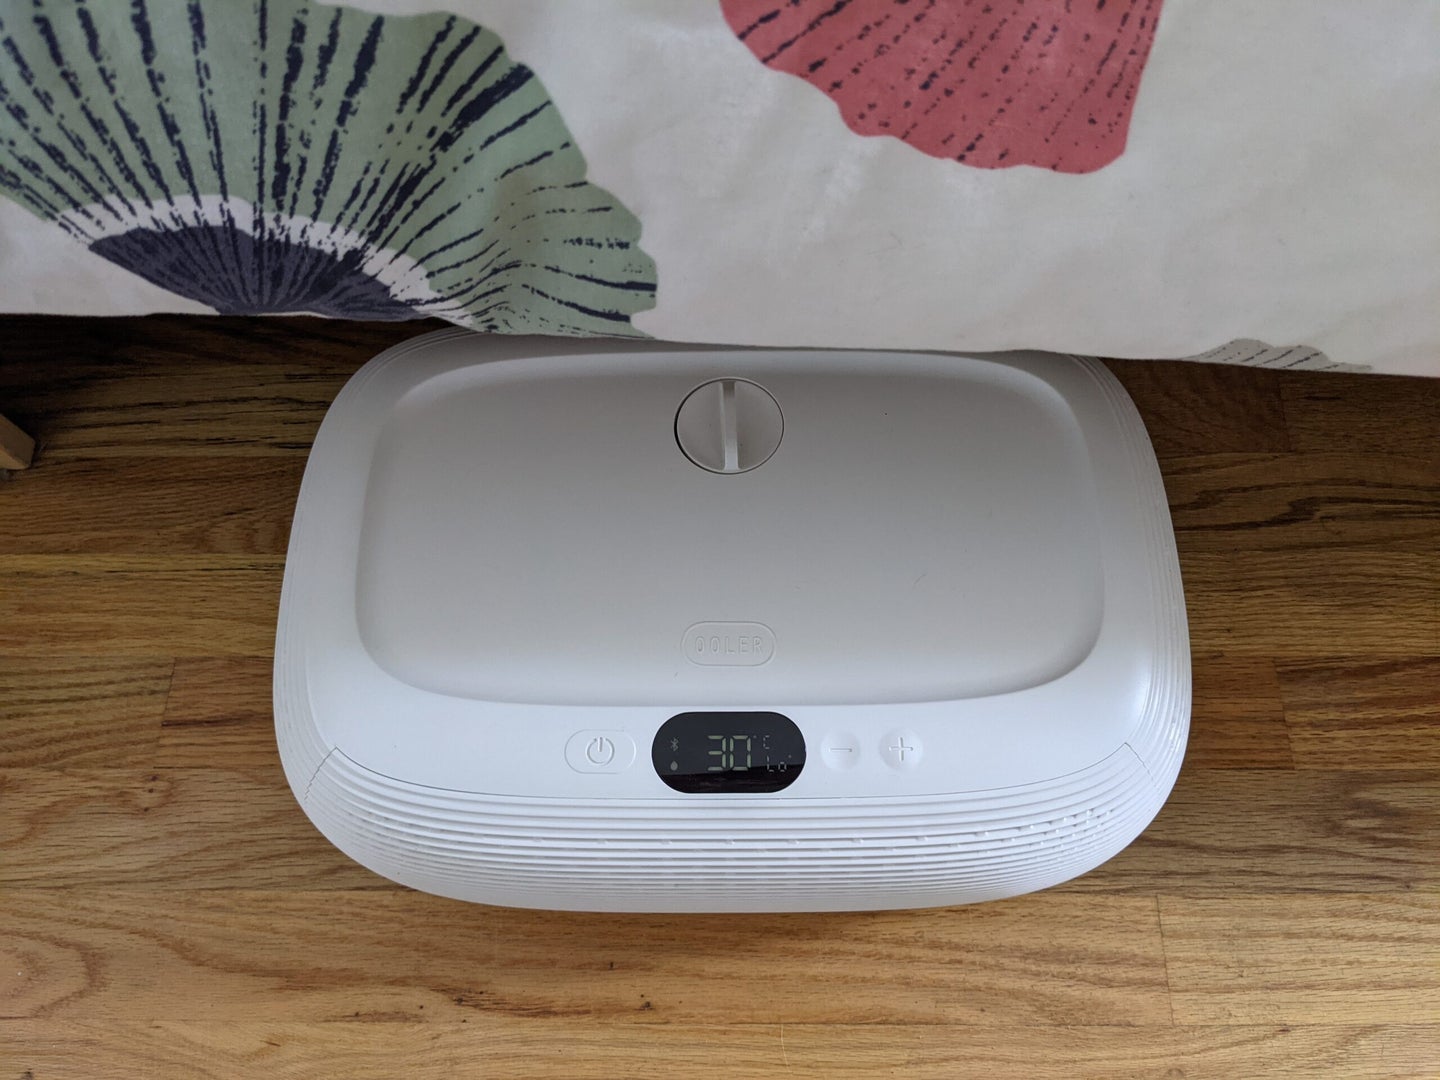 chili sleep ooler review - Ooler Temperature Controlled Sleep System REVIEW Take Back Your Night -  MacSources